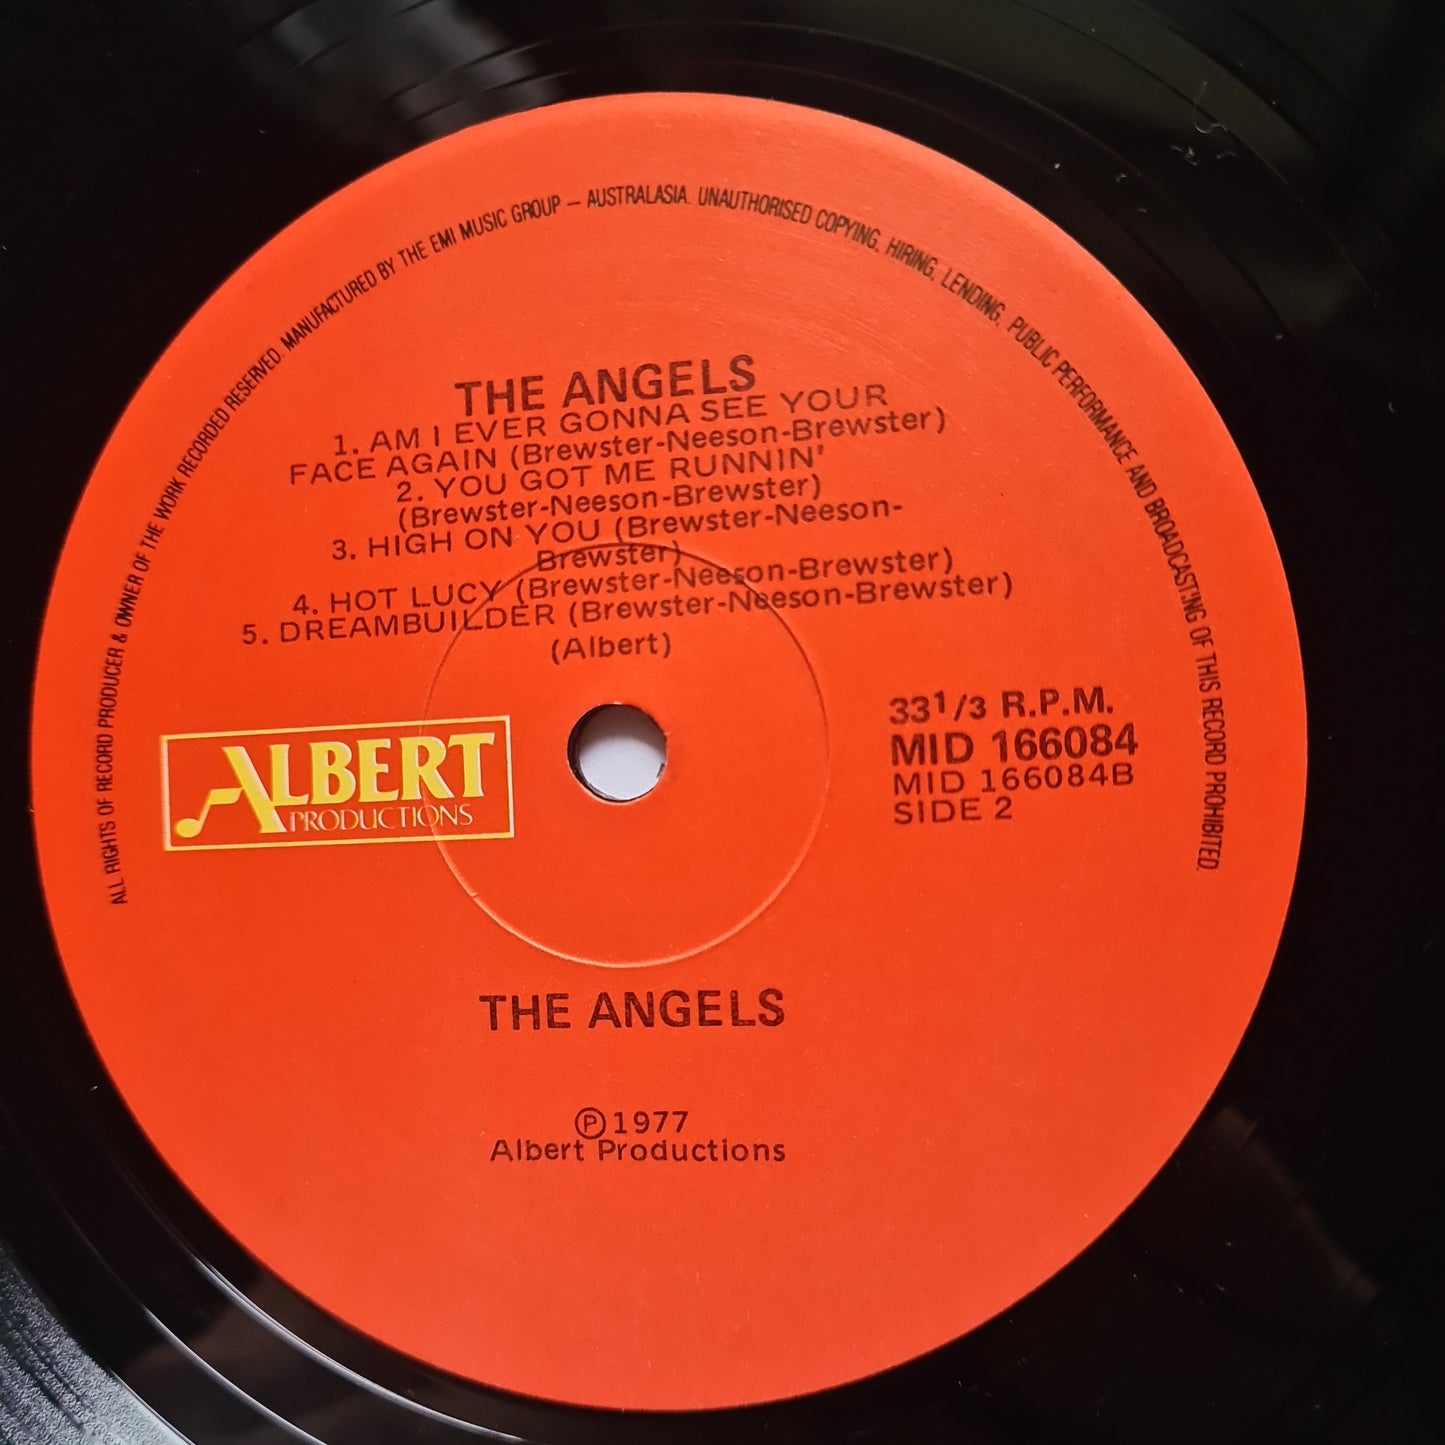 The Angels – The Angels - 1977 (1987 Red Label Pressing- Near Mint record looks Unplayed) - Vinyl Record